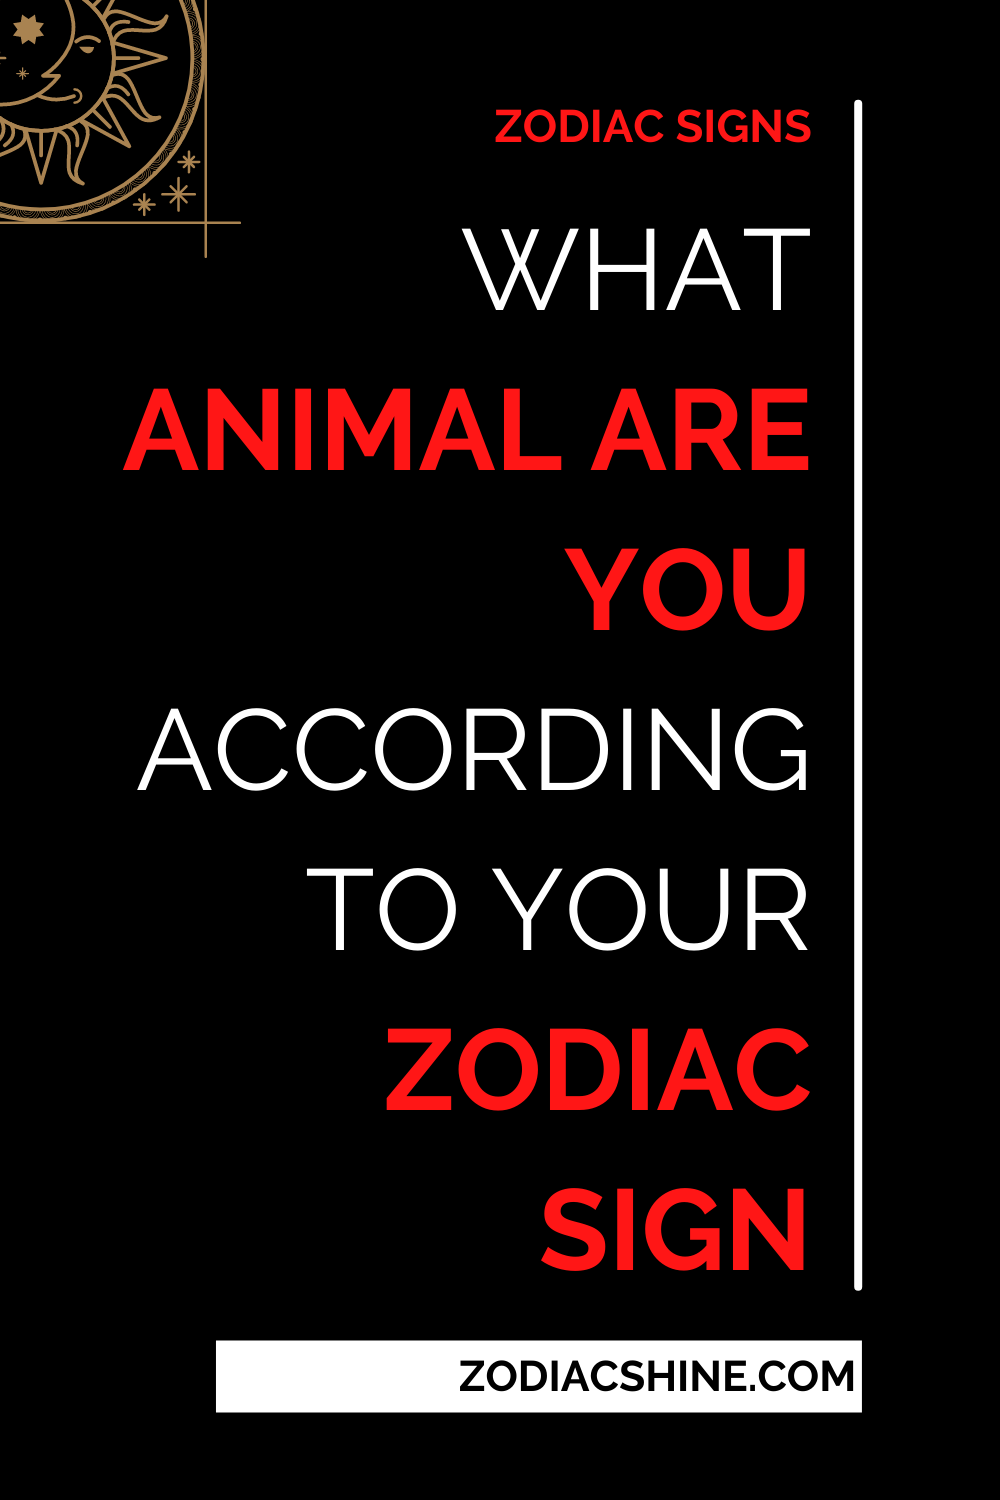 What Animal Are You According To Your Zodiac Sign